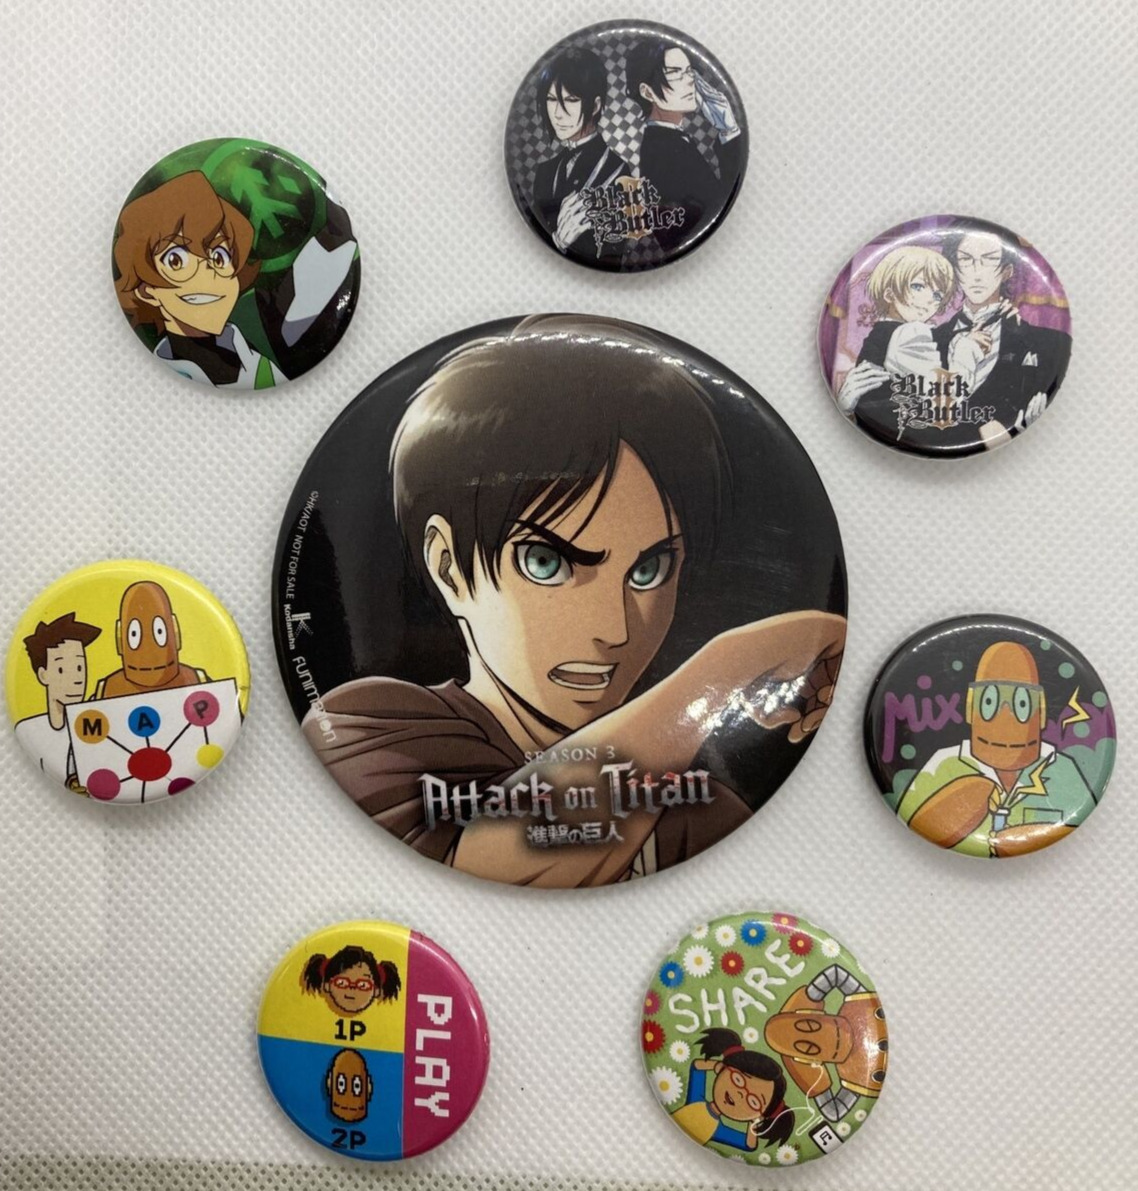 Lot of 8 Anime Video Game Buttons Pins Attack on Titan Black Butler